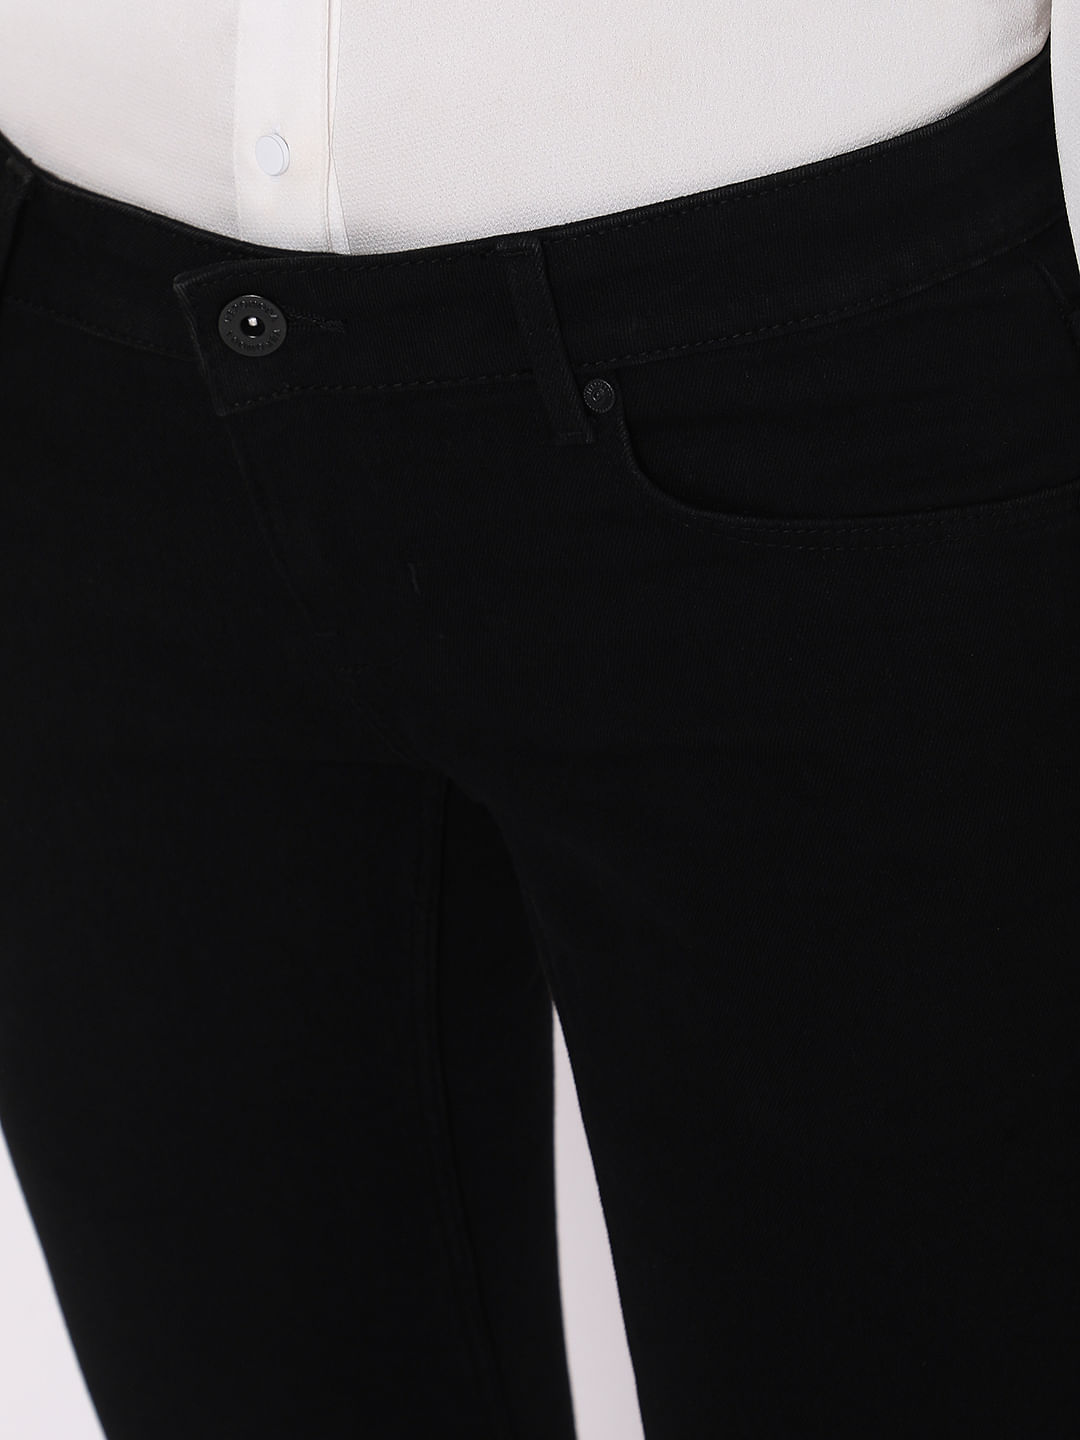 FASHIONABLE EXCLUSIVE WOMEN'S SKINNY FIT JEANS COMBO 4 BTN BLACK F & 1 WHITE